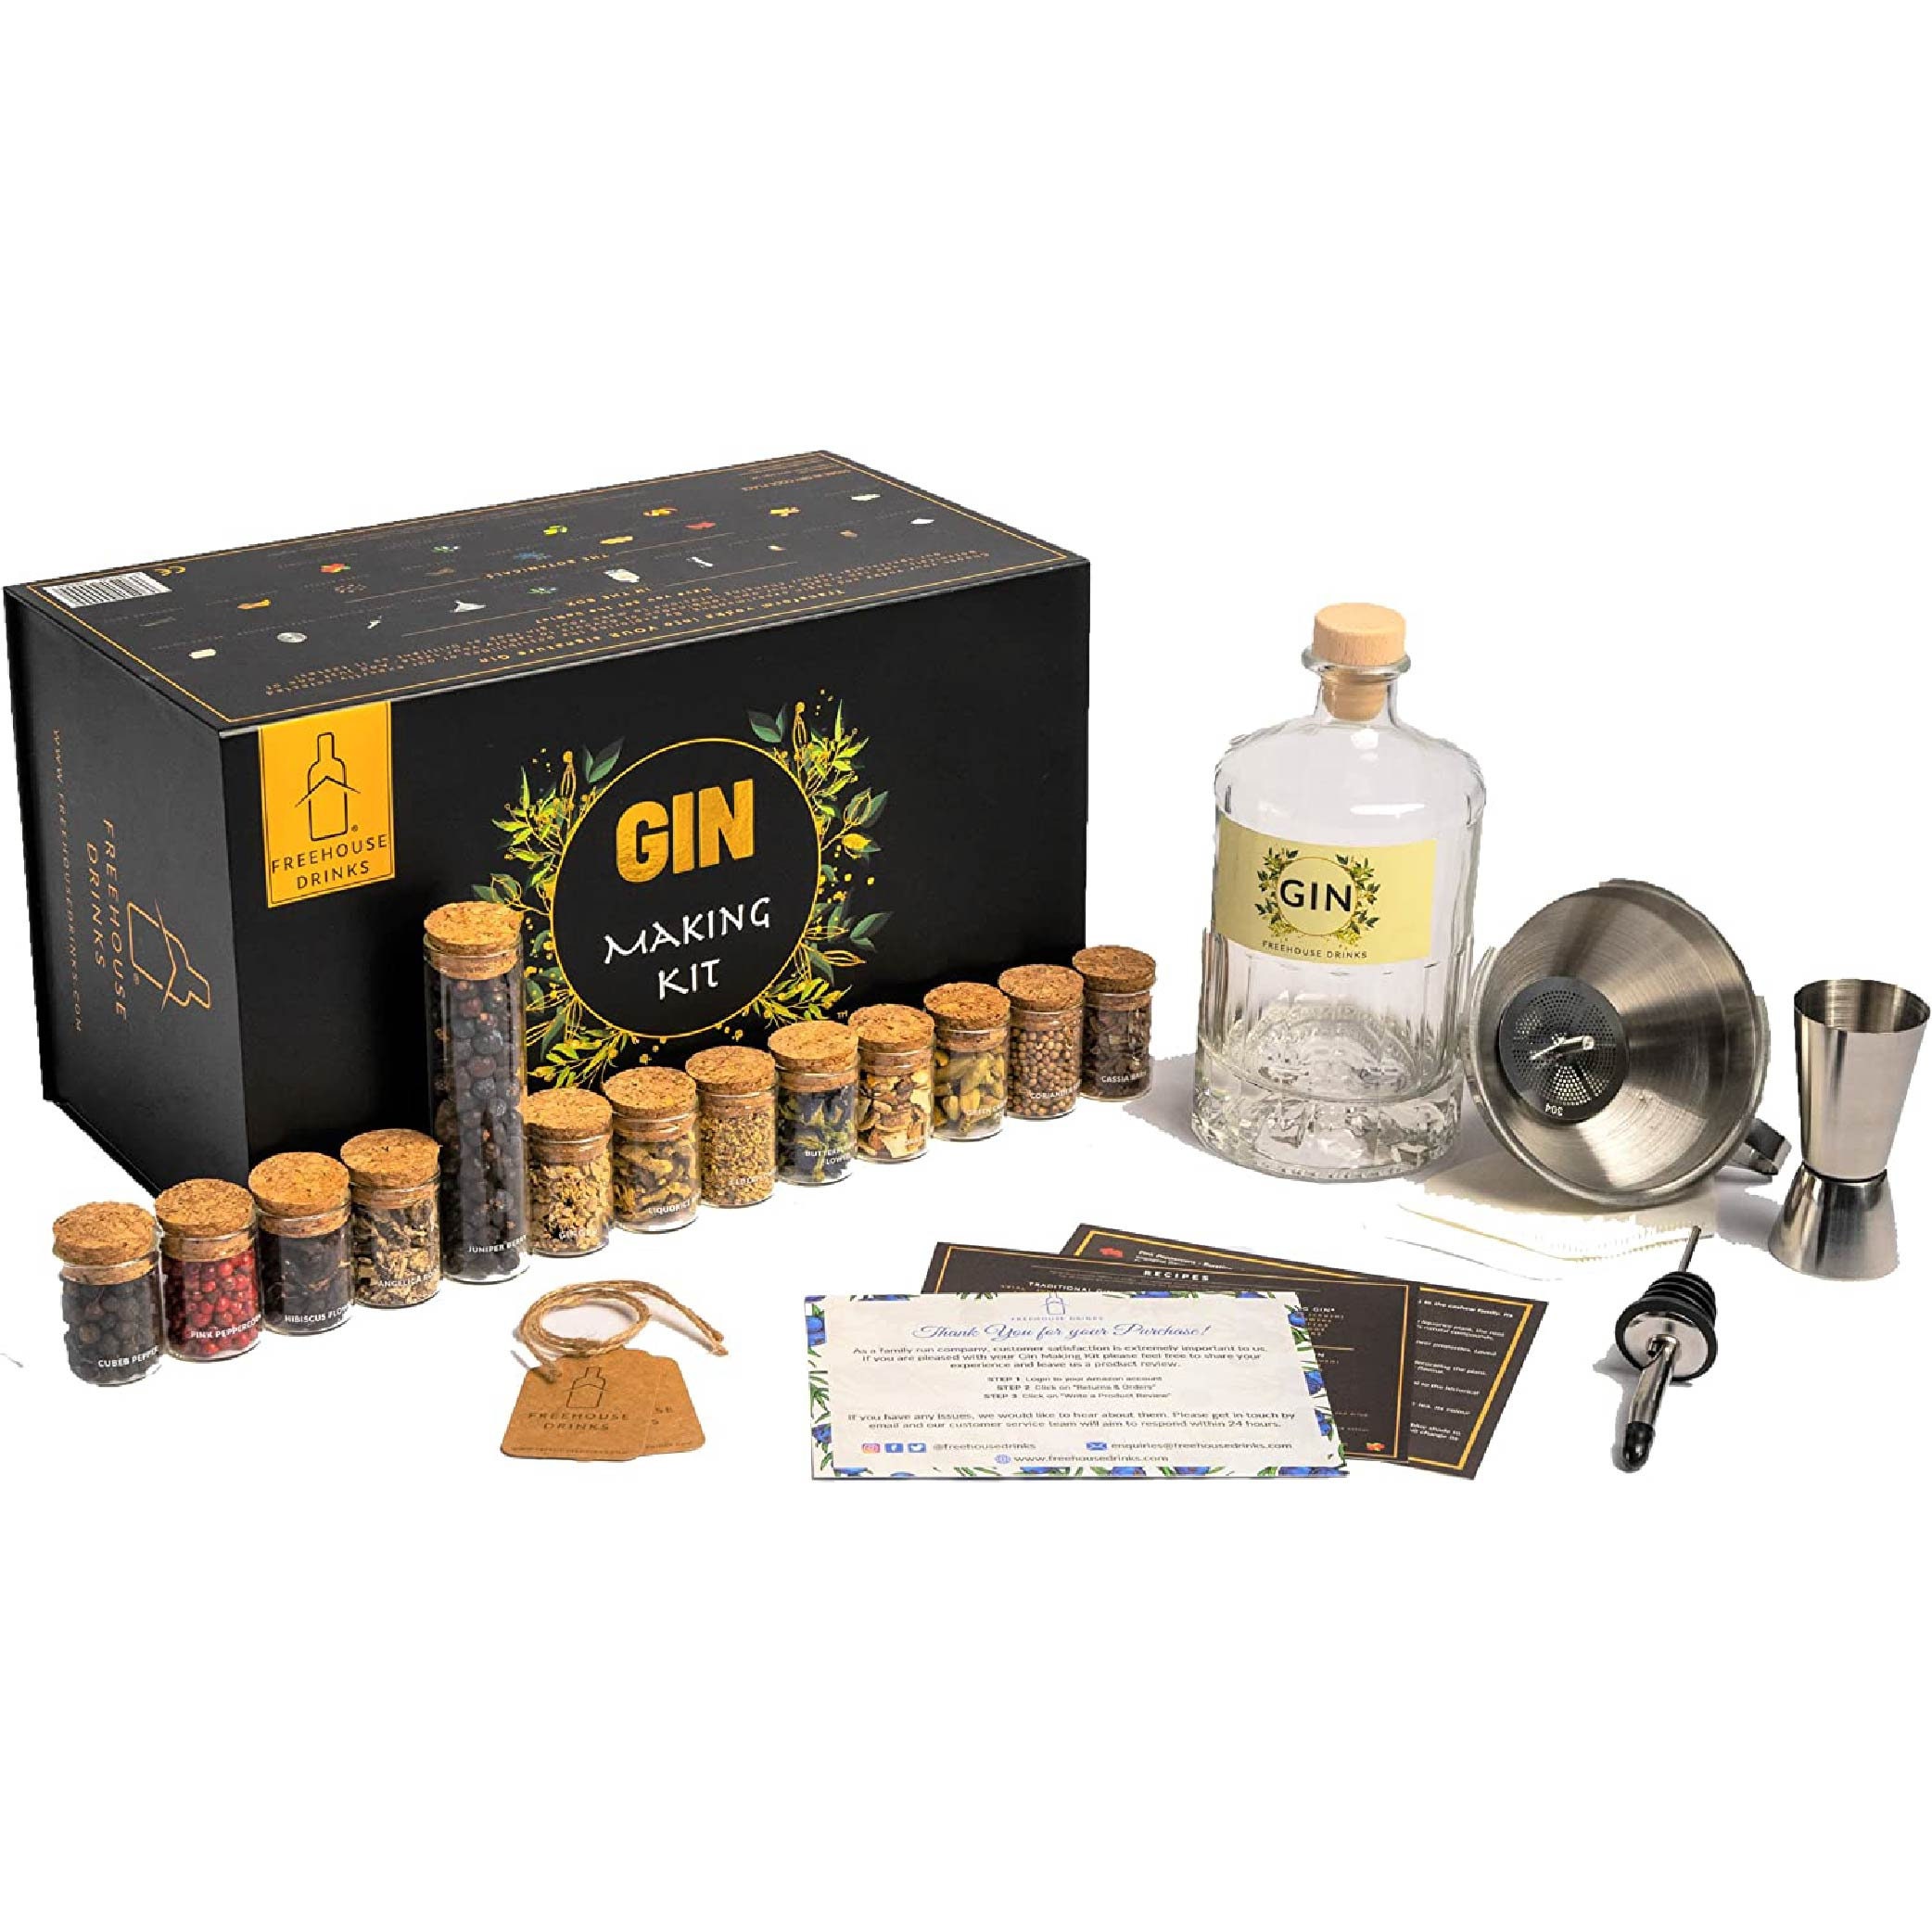 Gin Making Kit Make Your Own Gin at Home in 24 Hours With Gin